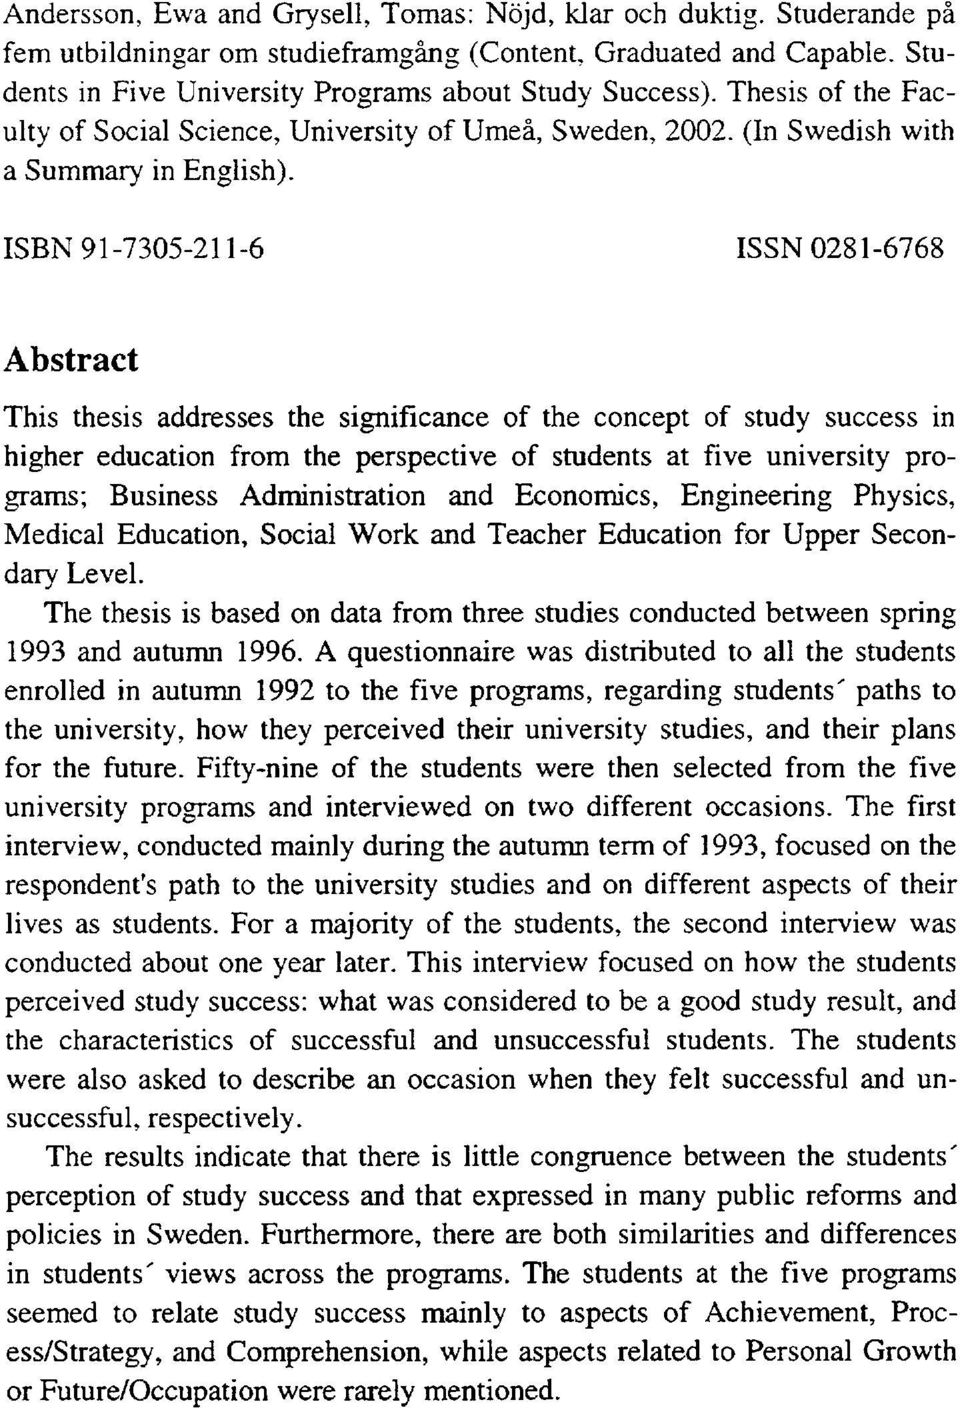 ISBN 91-7305-211-6 ISSN 0281-6768 Abstract This thesis addresses the significance of the concept of study success in higher education from the perspective of students at five university programs;